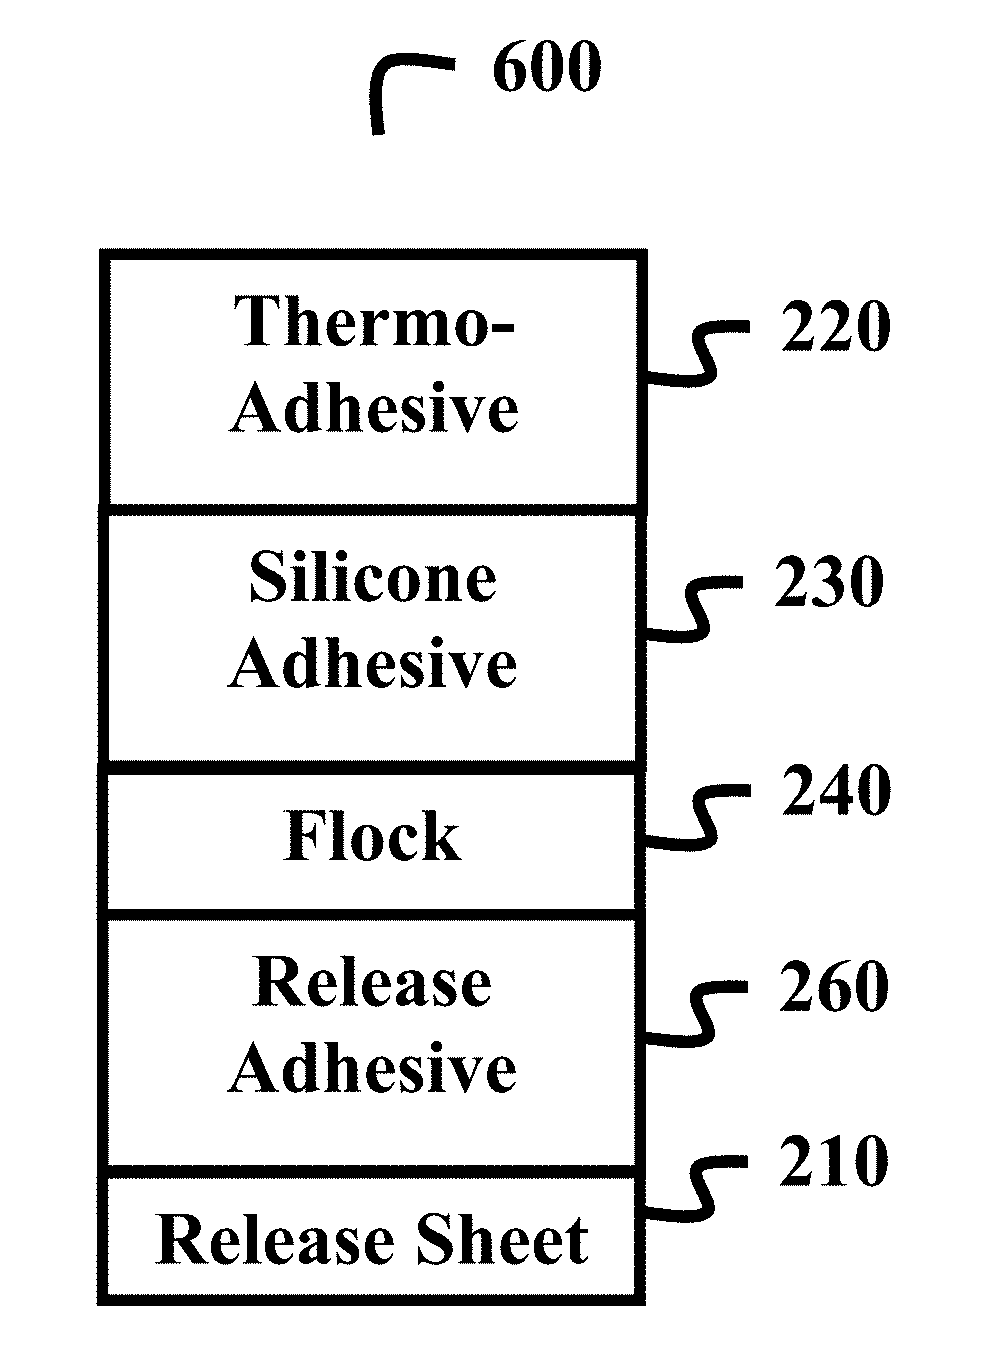 Flocked products having a silicone adhesive composition and methods of making and using the same